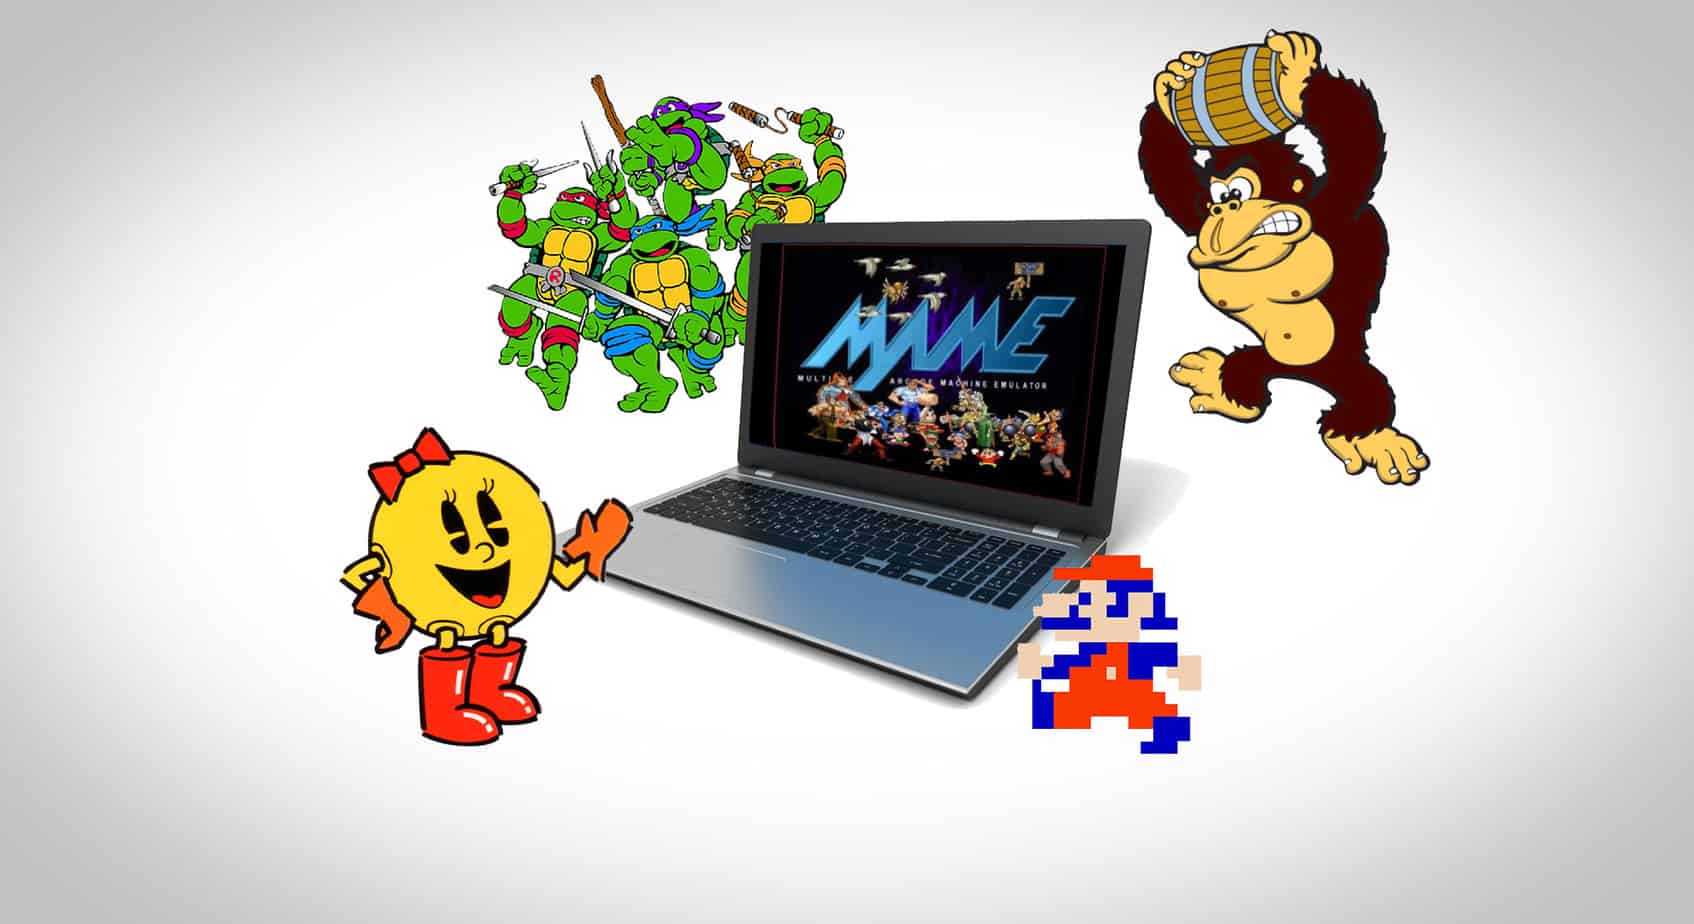 classic mame games